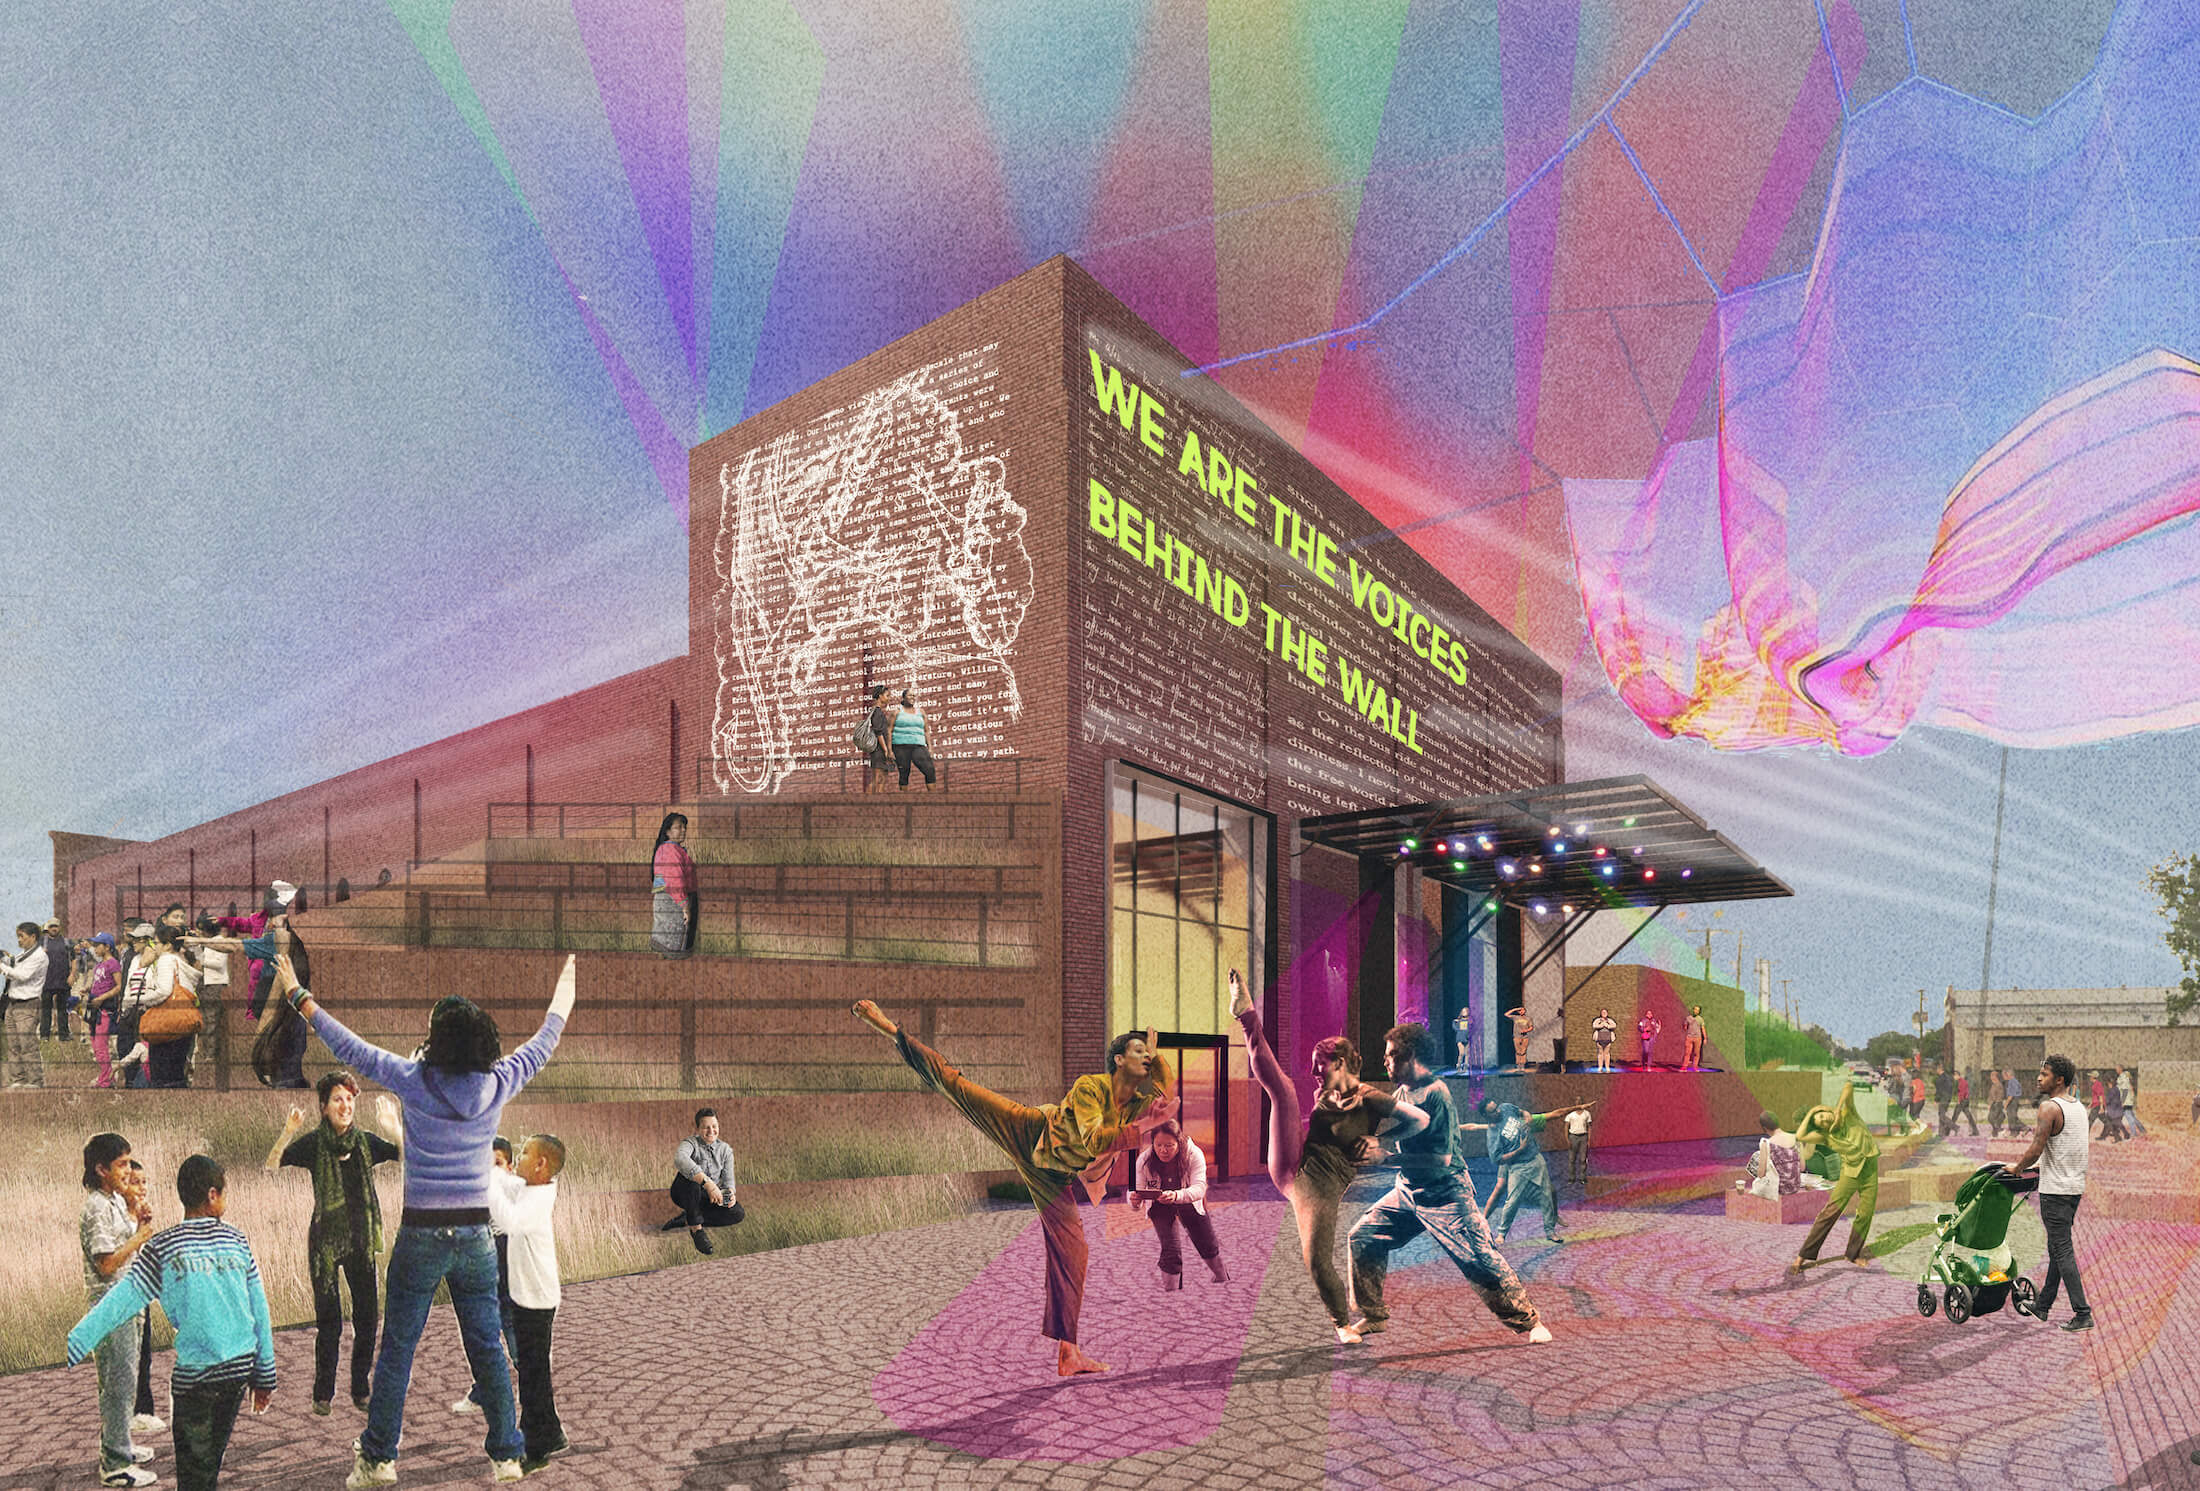 rendering of people outside an arts center